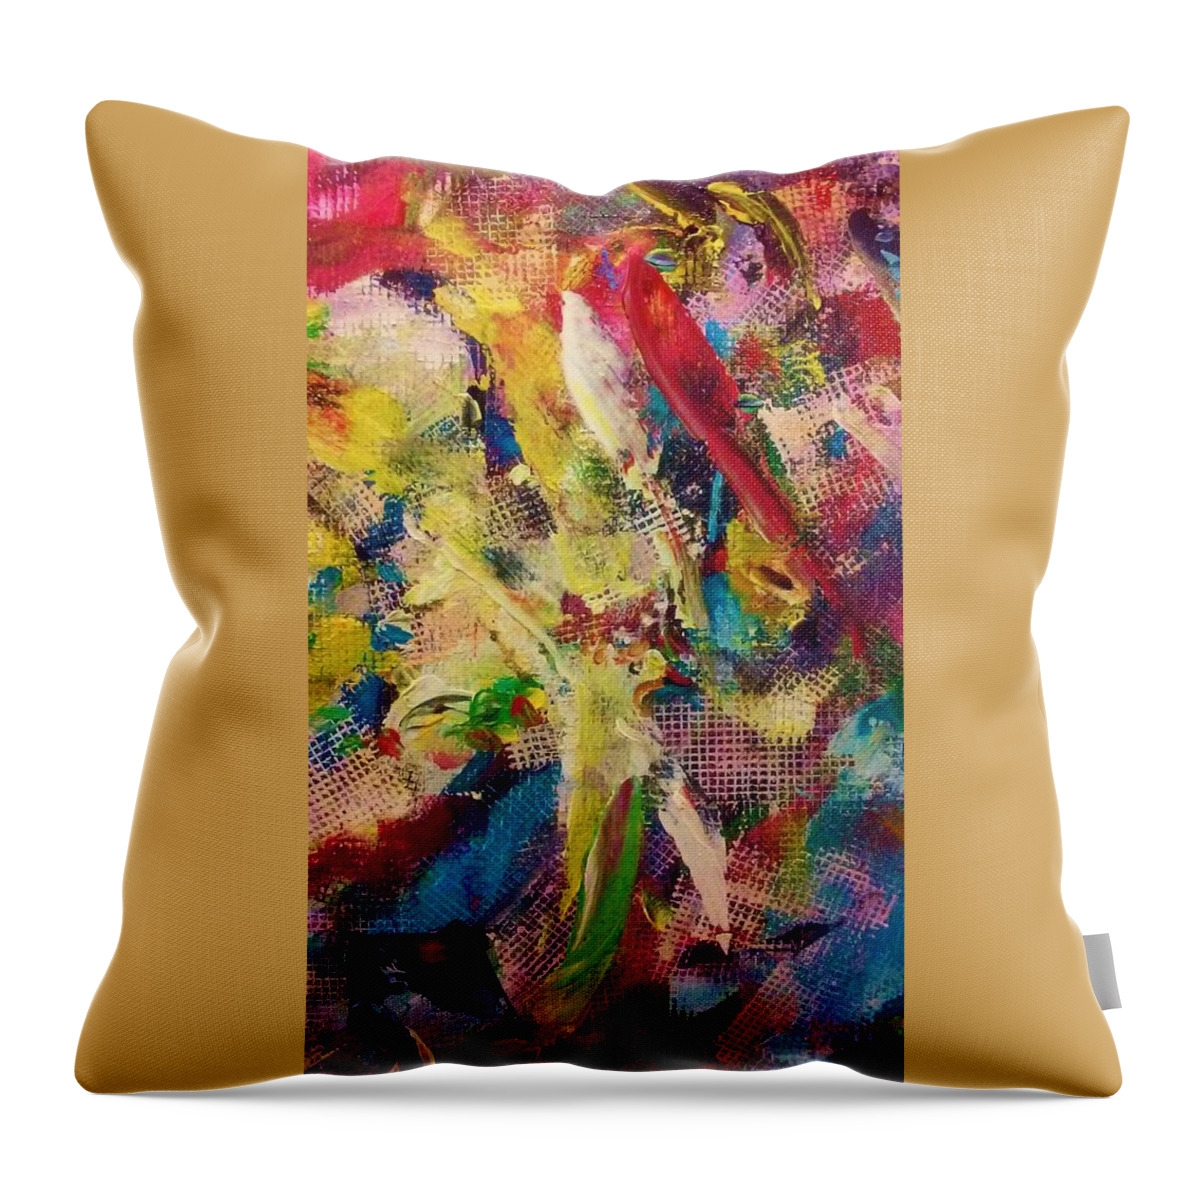 Colorful Art Throw Pillow featuring the painting Two Birds by Ray Khalife